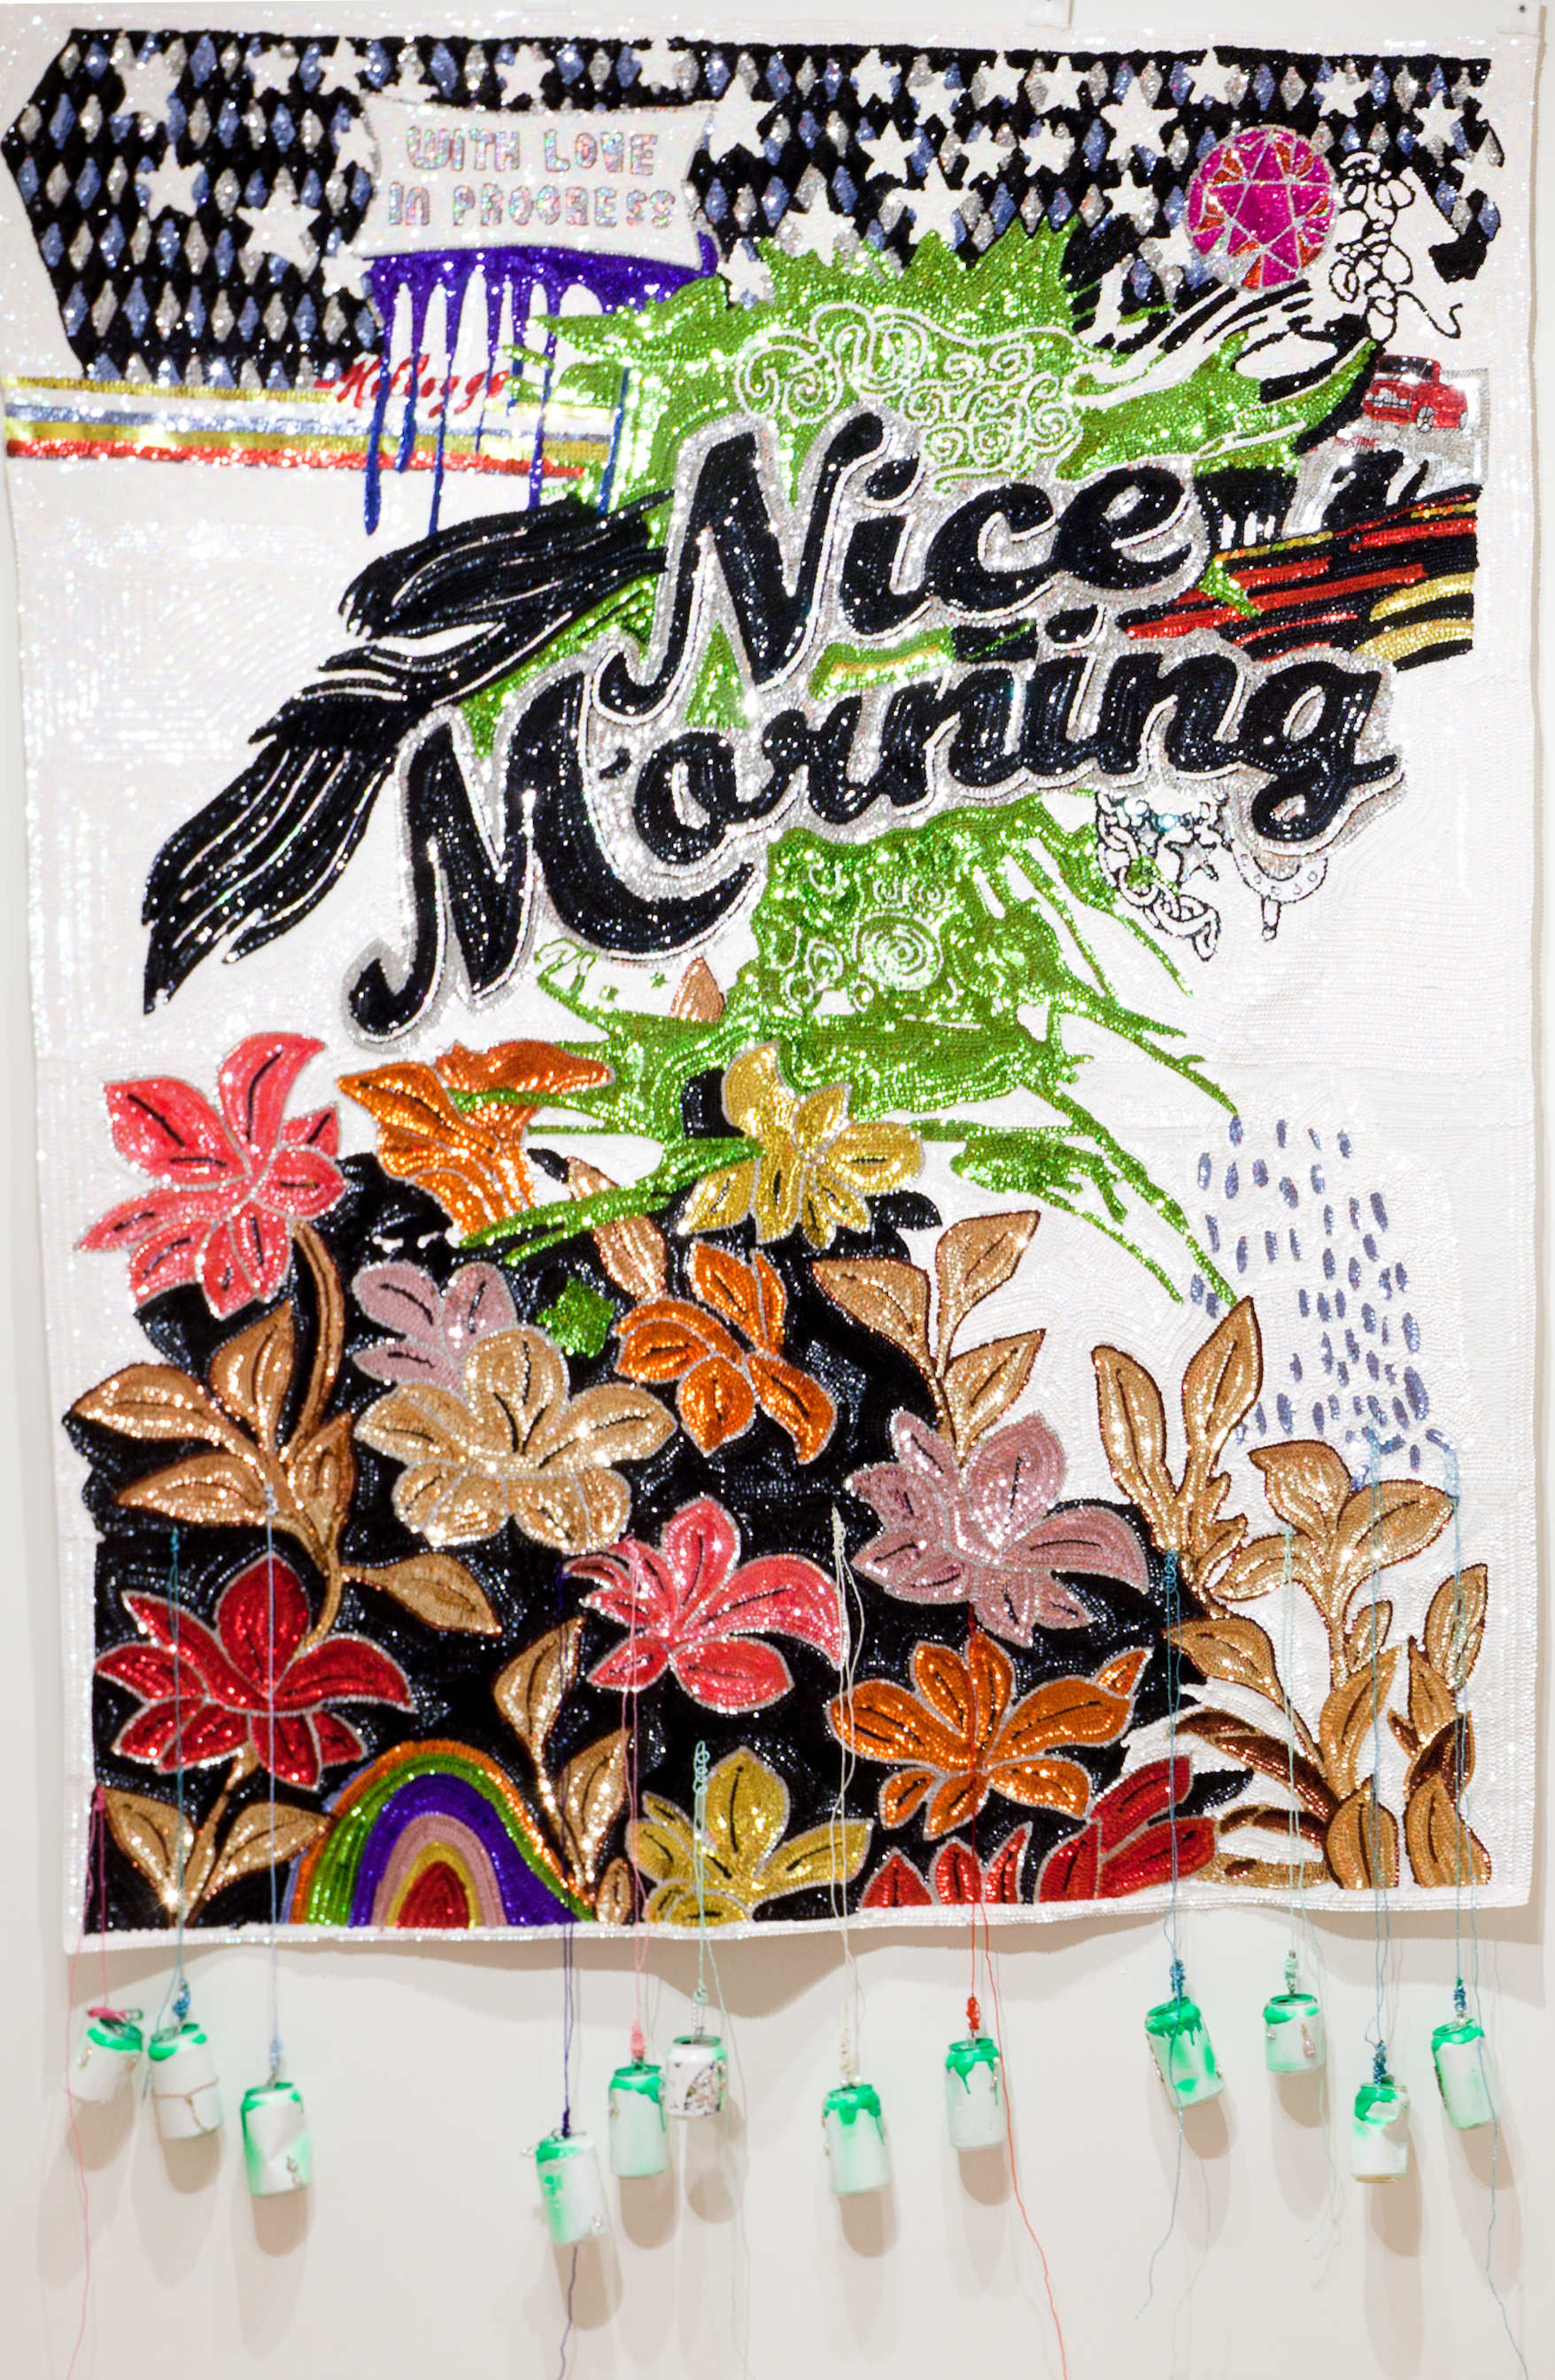 Daniel González,Nice Morning, 2011, hand-sewn sequins, pearls and cans, 230 x 160 cm